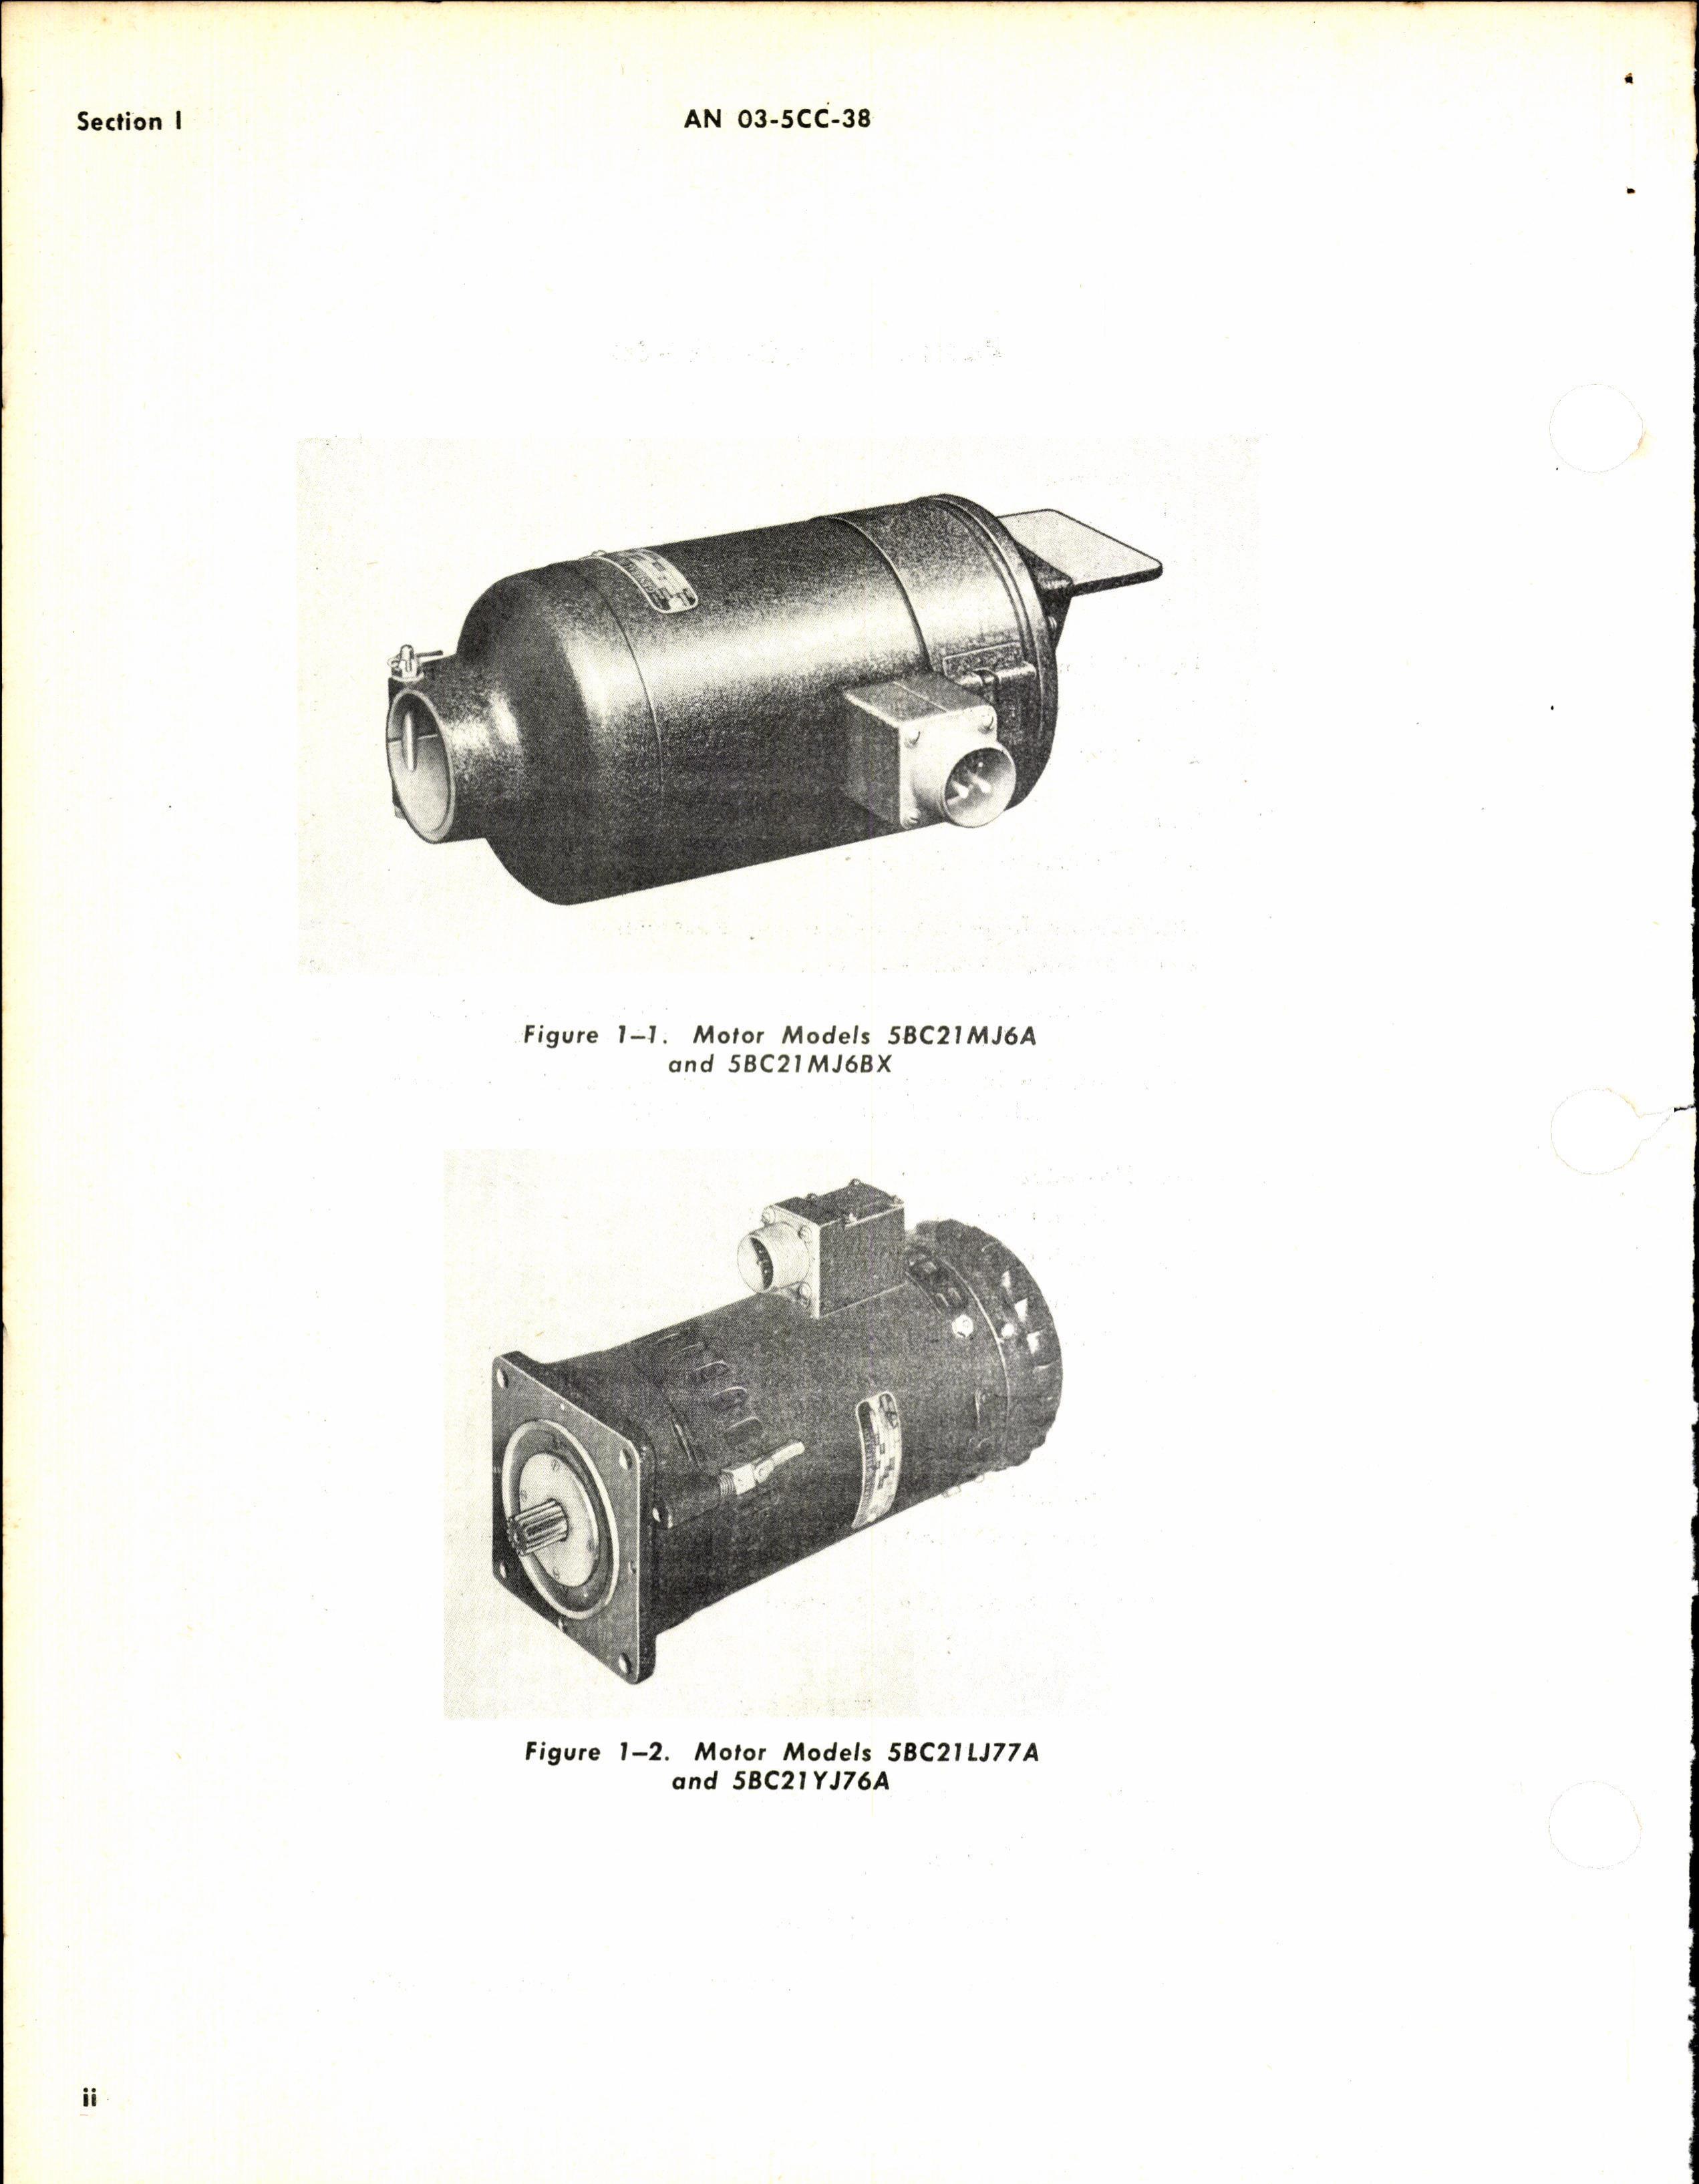 Sample page 4 from AirCorps Library document: Overhaul Instructions for Aircraft Motors Series 5BC21